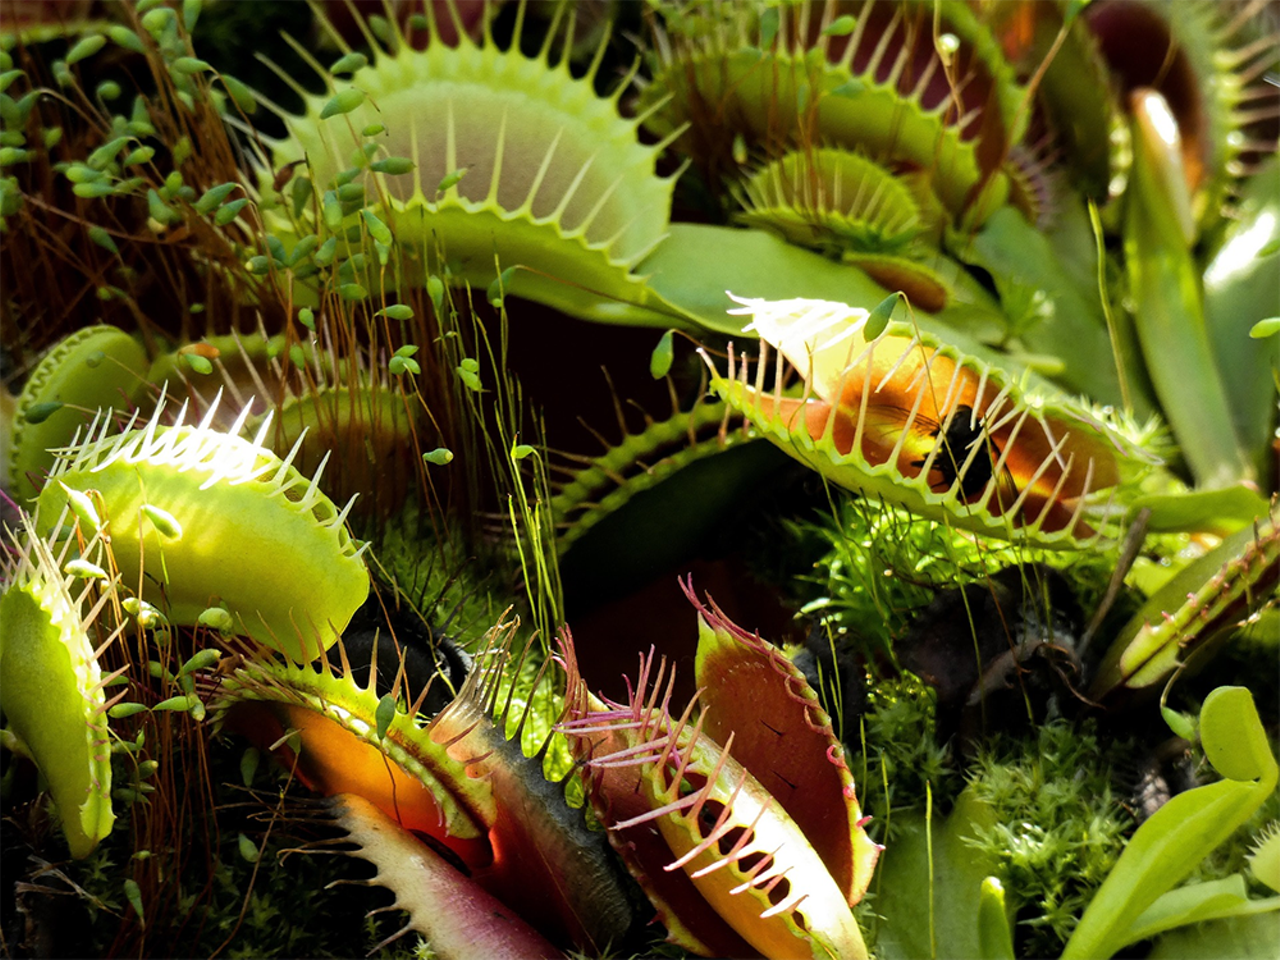 Caring for Carnivorous Plants!
Saturday, Oct. 13: 1 p.m.
Photo by Kenny Coogan